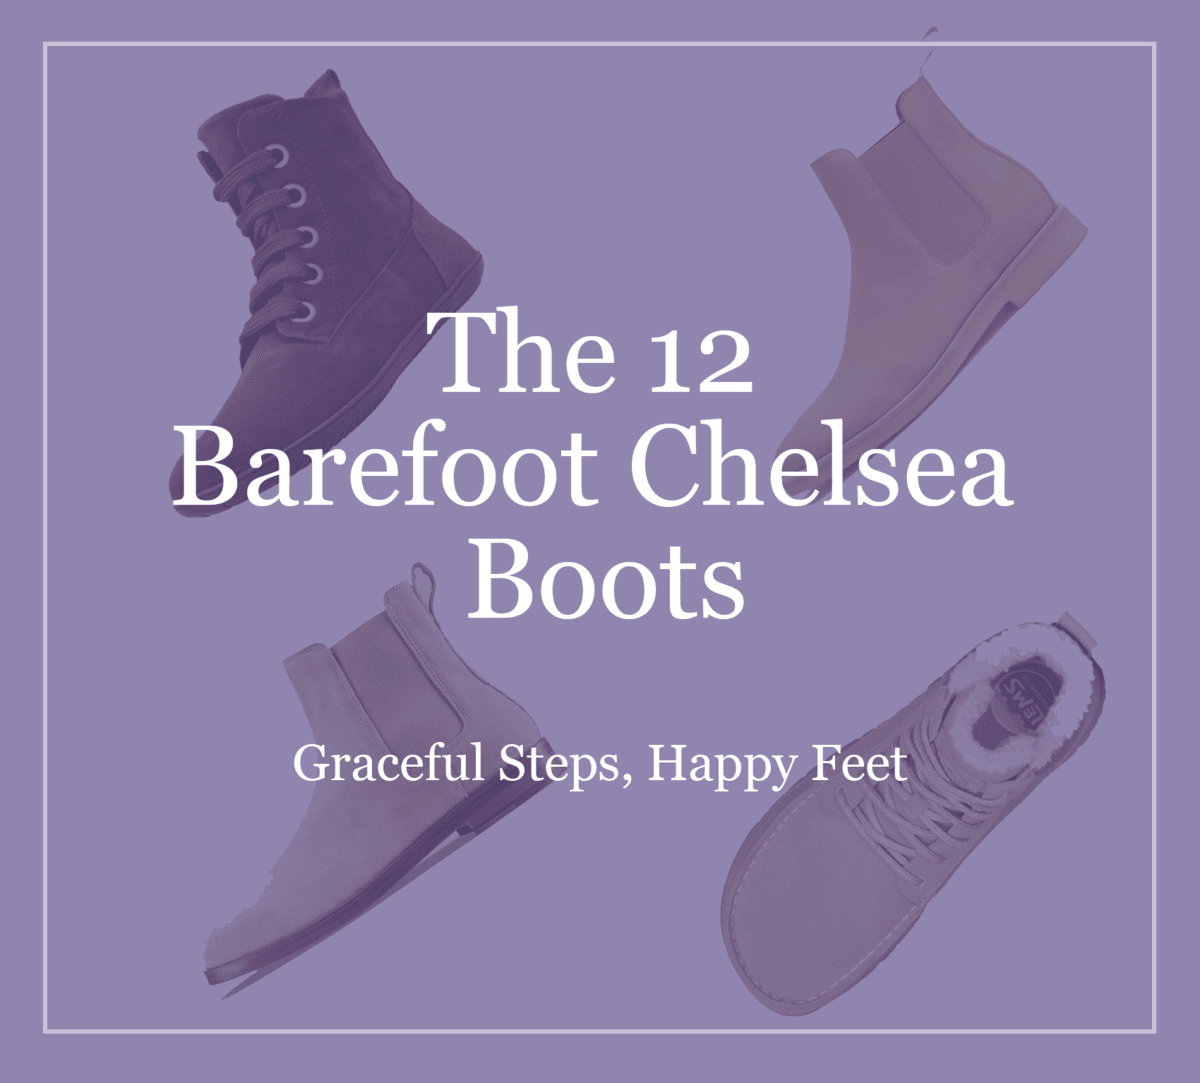 The 12 Barefoot Chelsea Boots